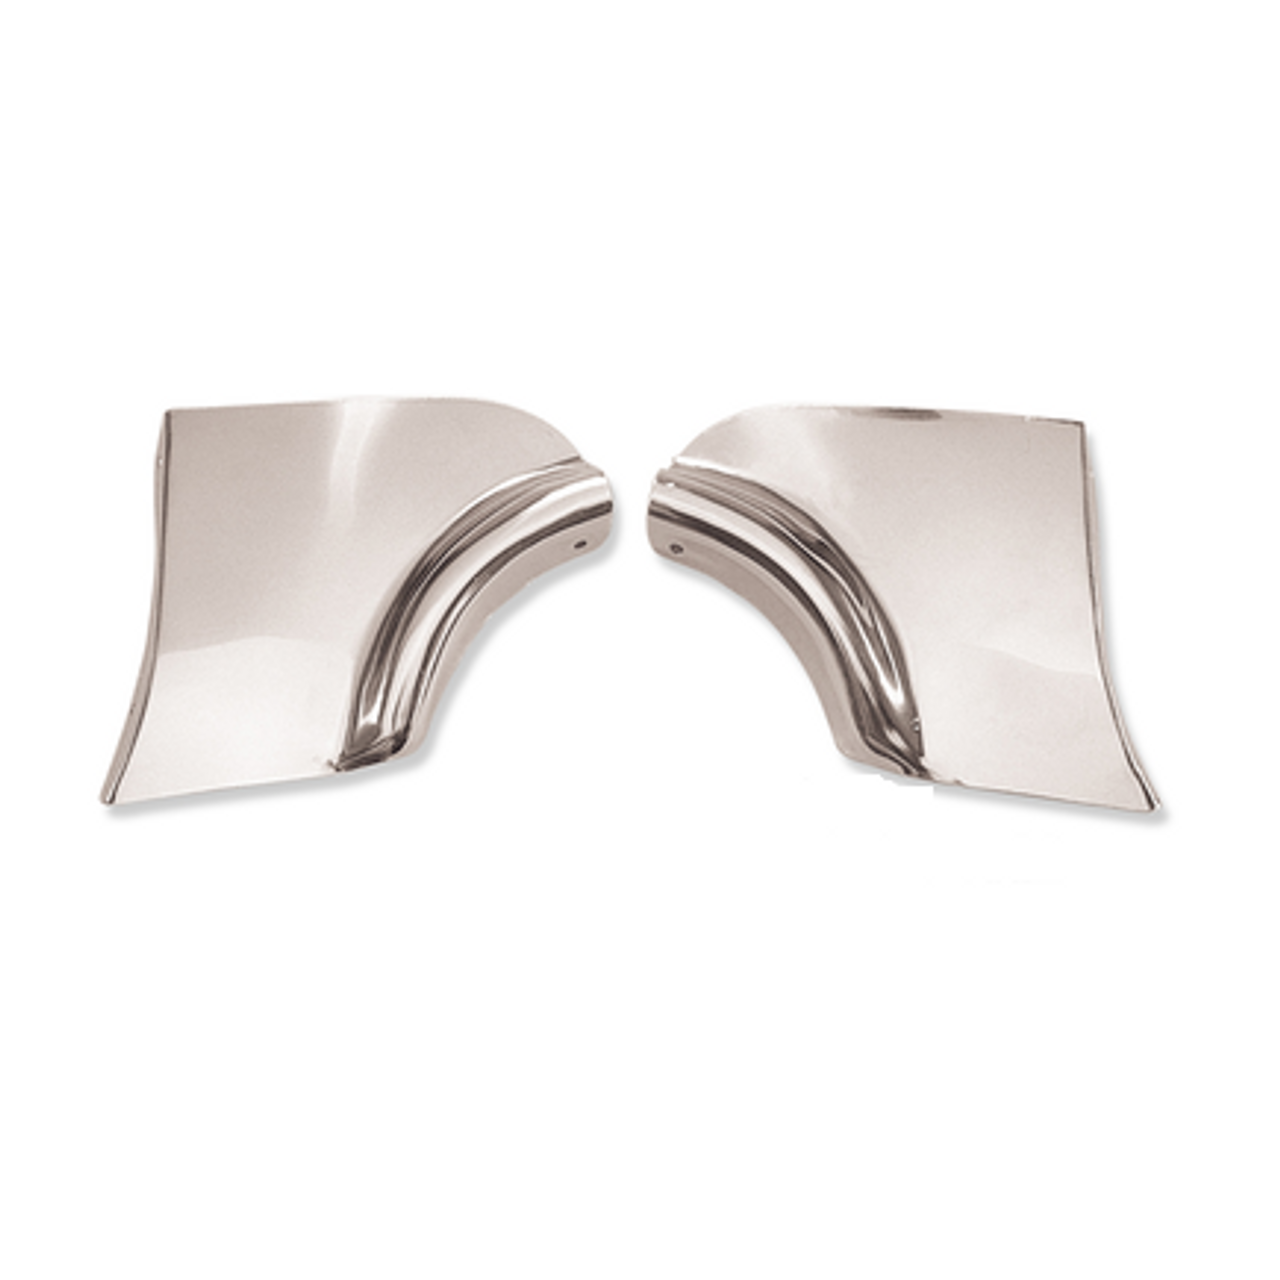 1955 Chevy Car Stainless Fender Skirt Scuff Pads, Pair